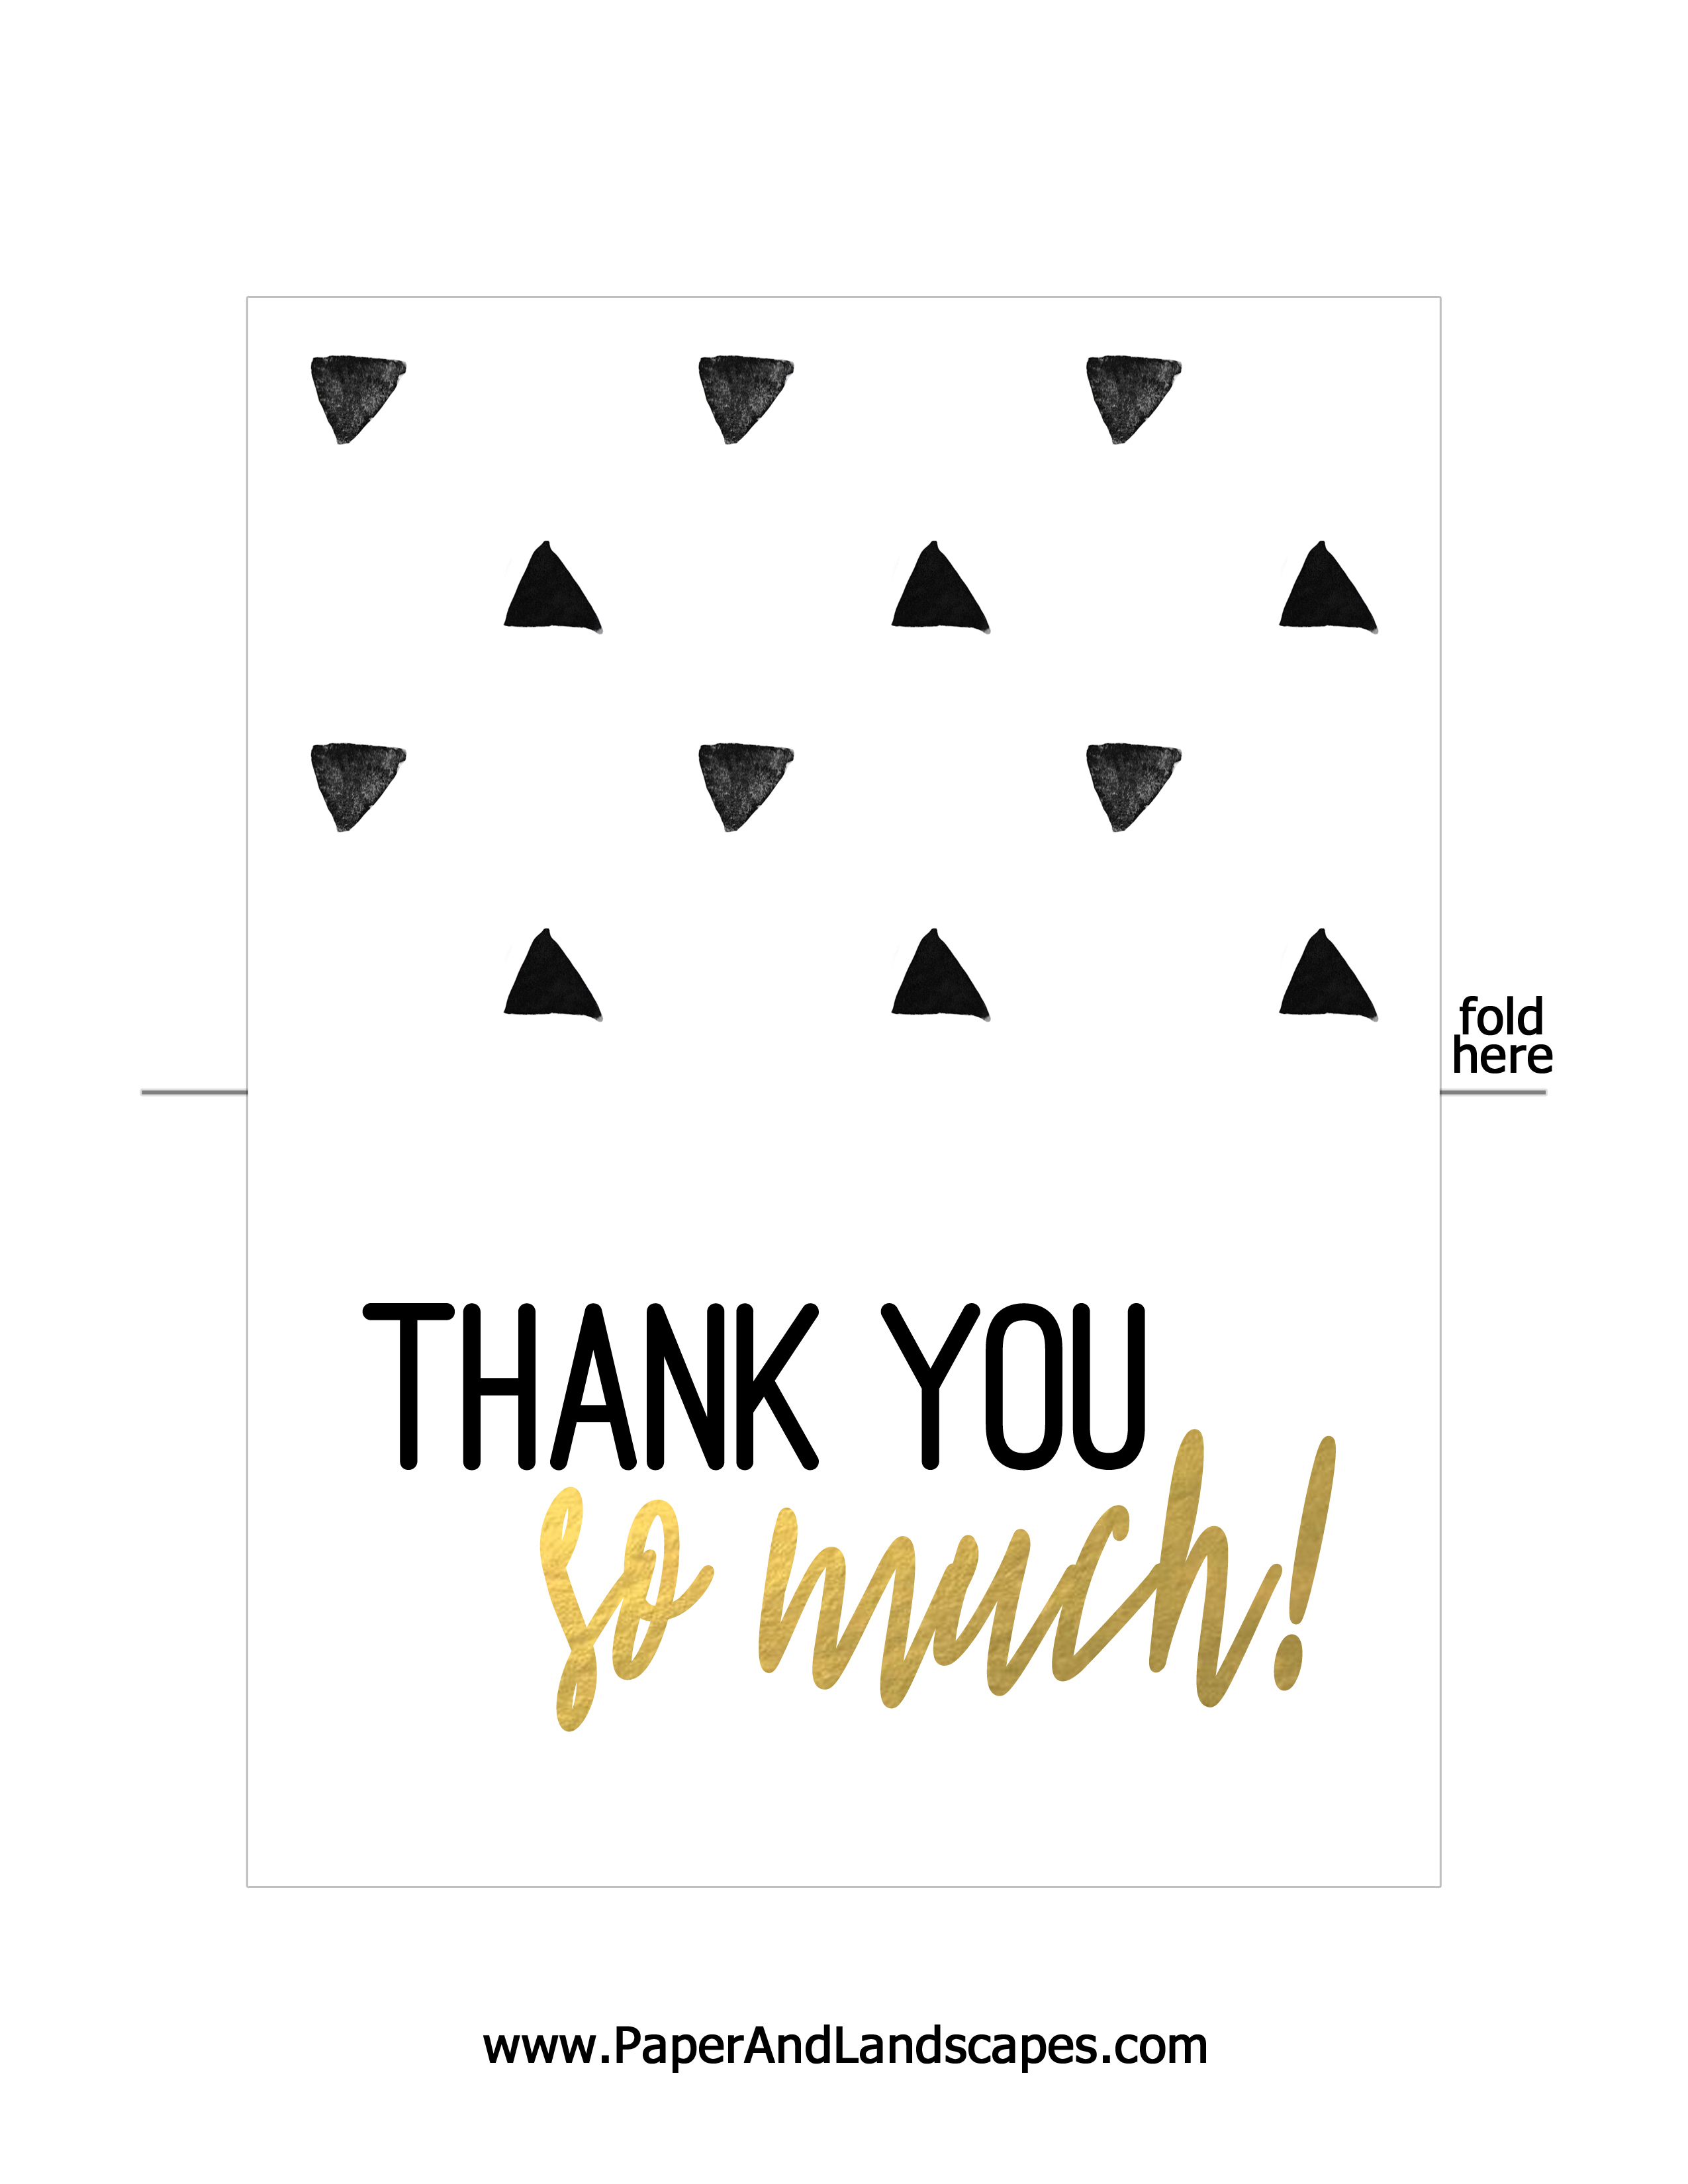 Free Printable Thank You Cards - Paper And Landscapes - Free Printable Thank You Notes